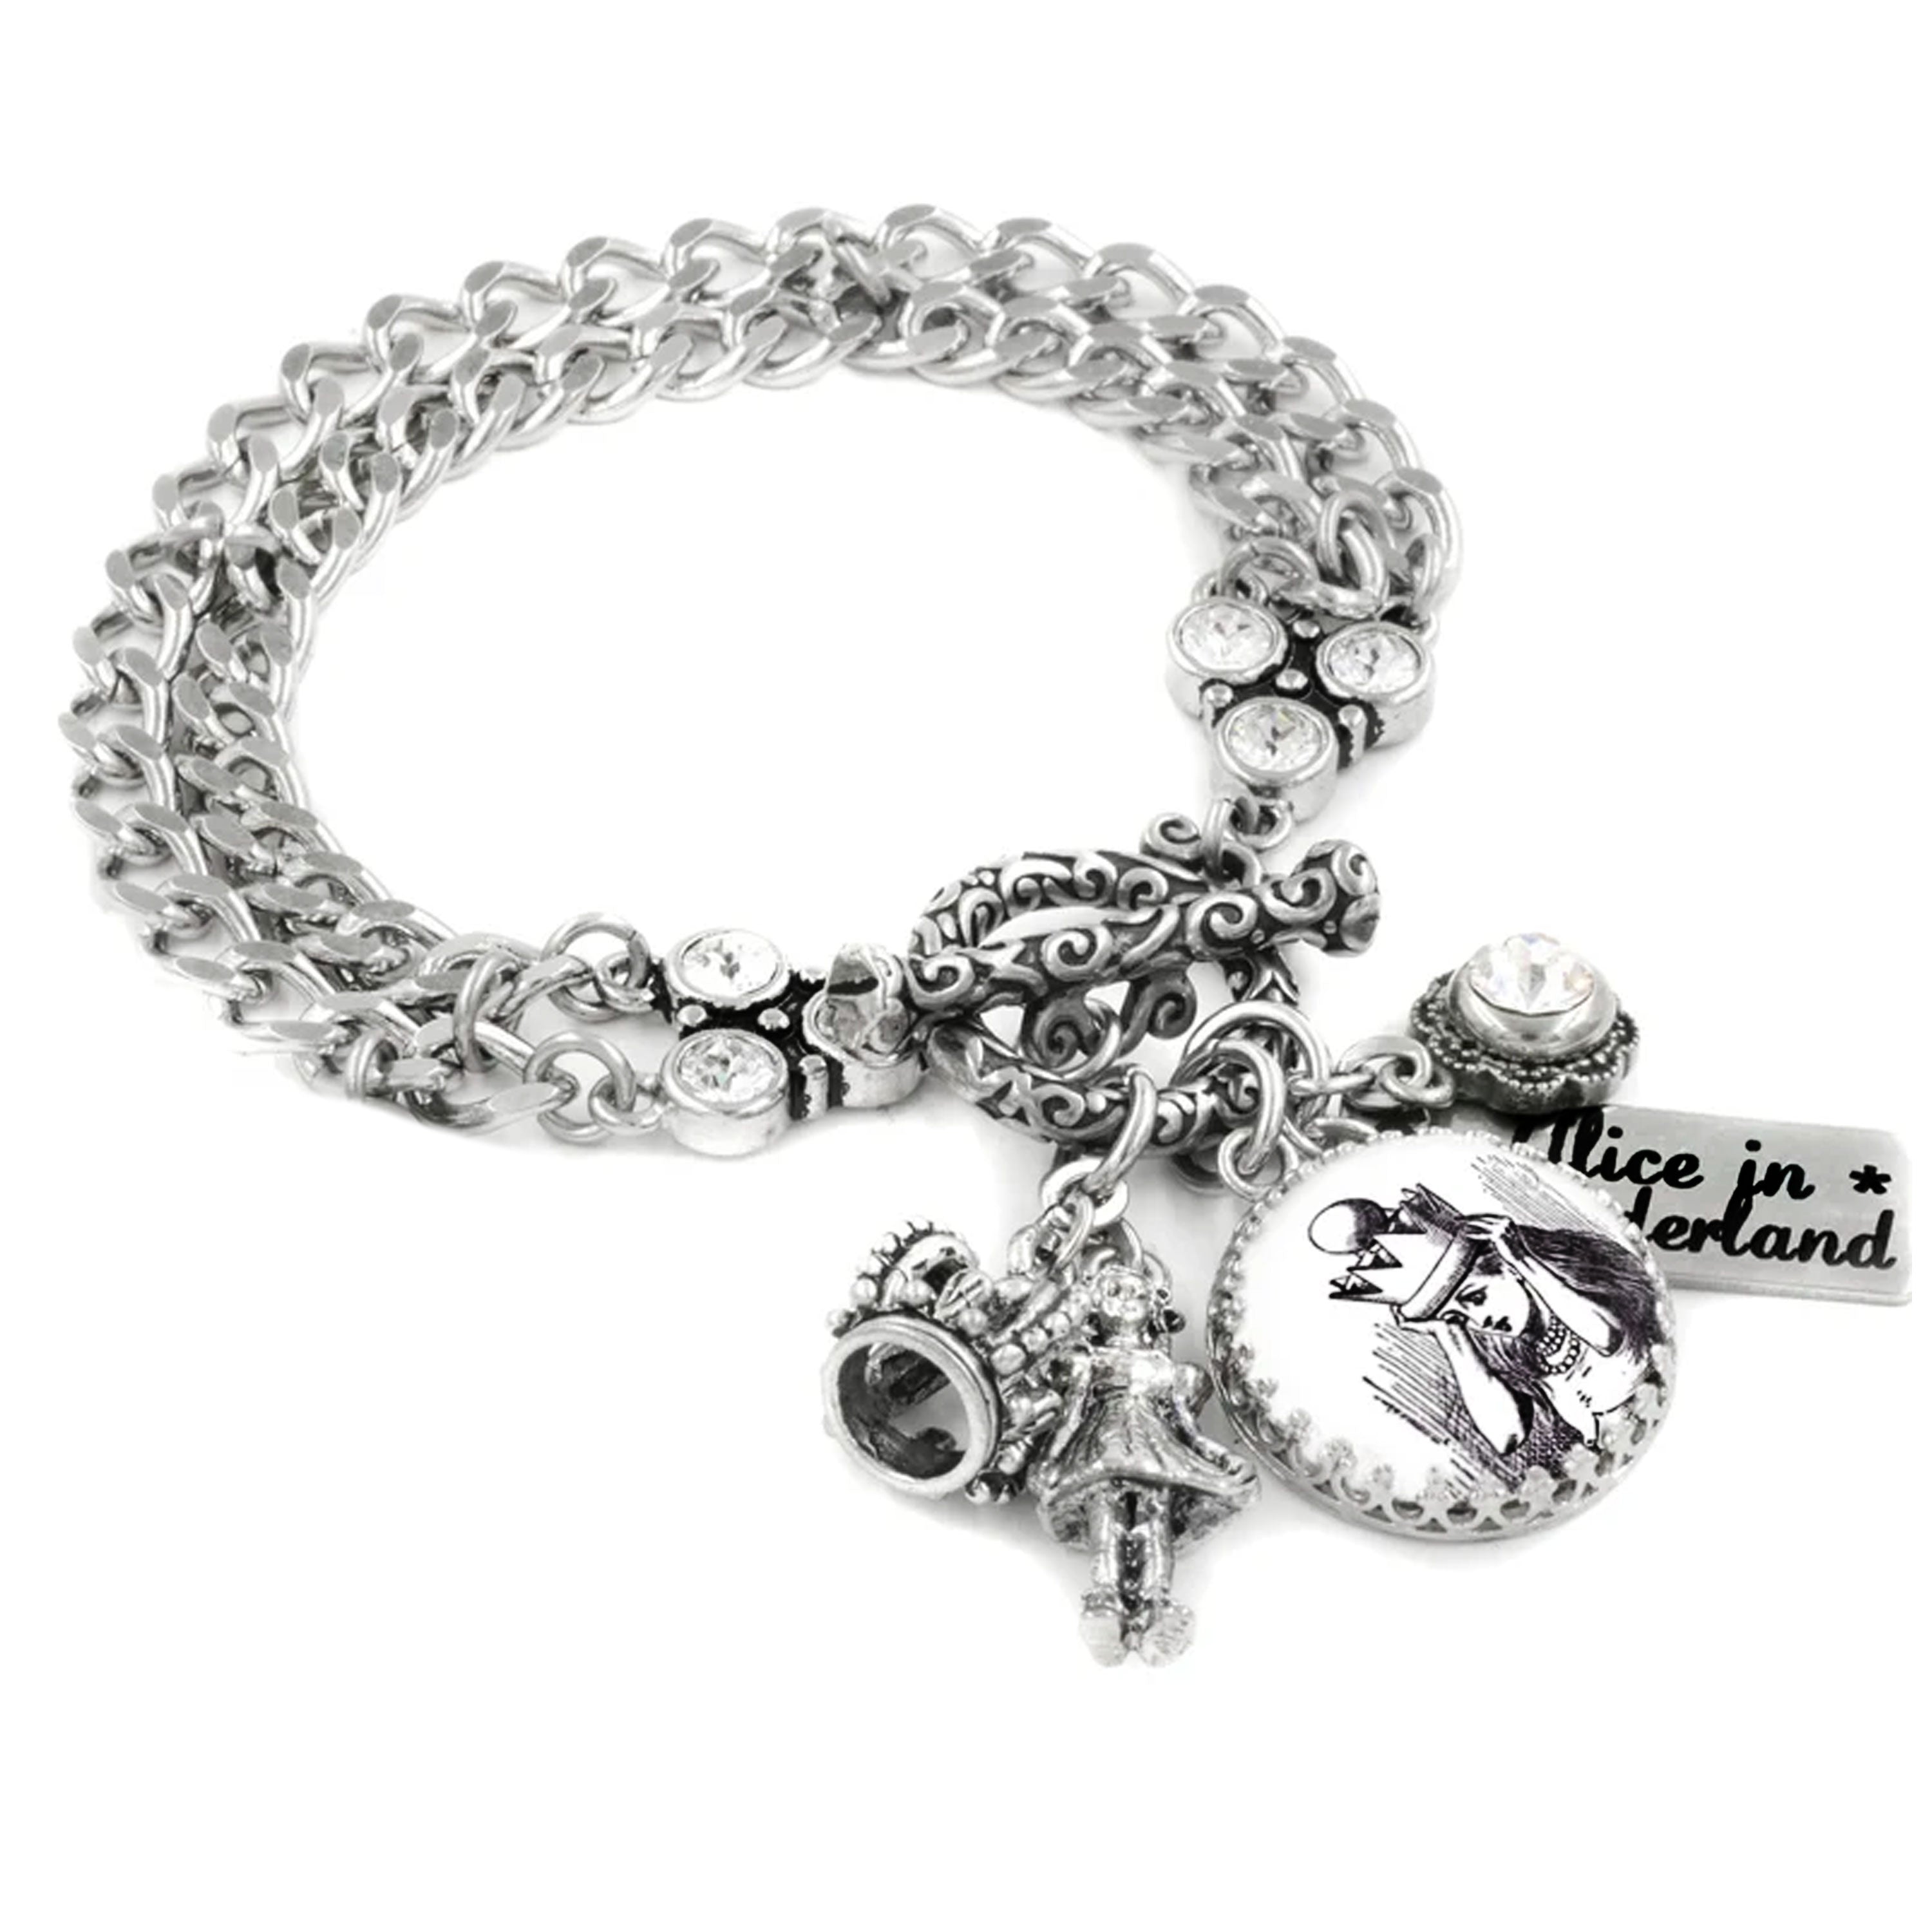 Alice In Wonderland Inspired Stranger Things Charm Bracelet With Mirror,  Clock, Teapot, Playing Card, Hat, And Key In Gift Box From Lemonnana, $2.54  | DHgate.Com